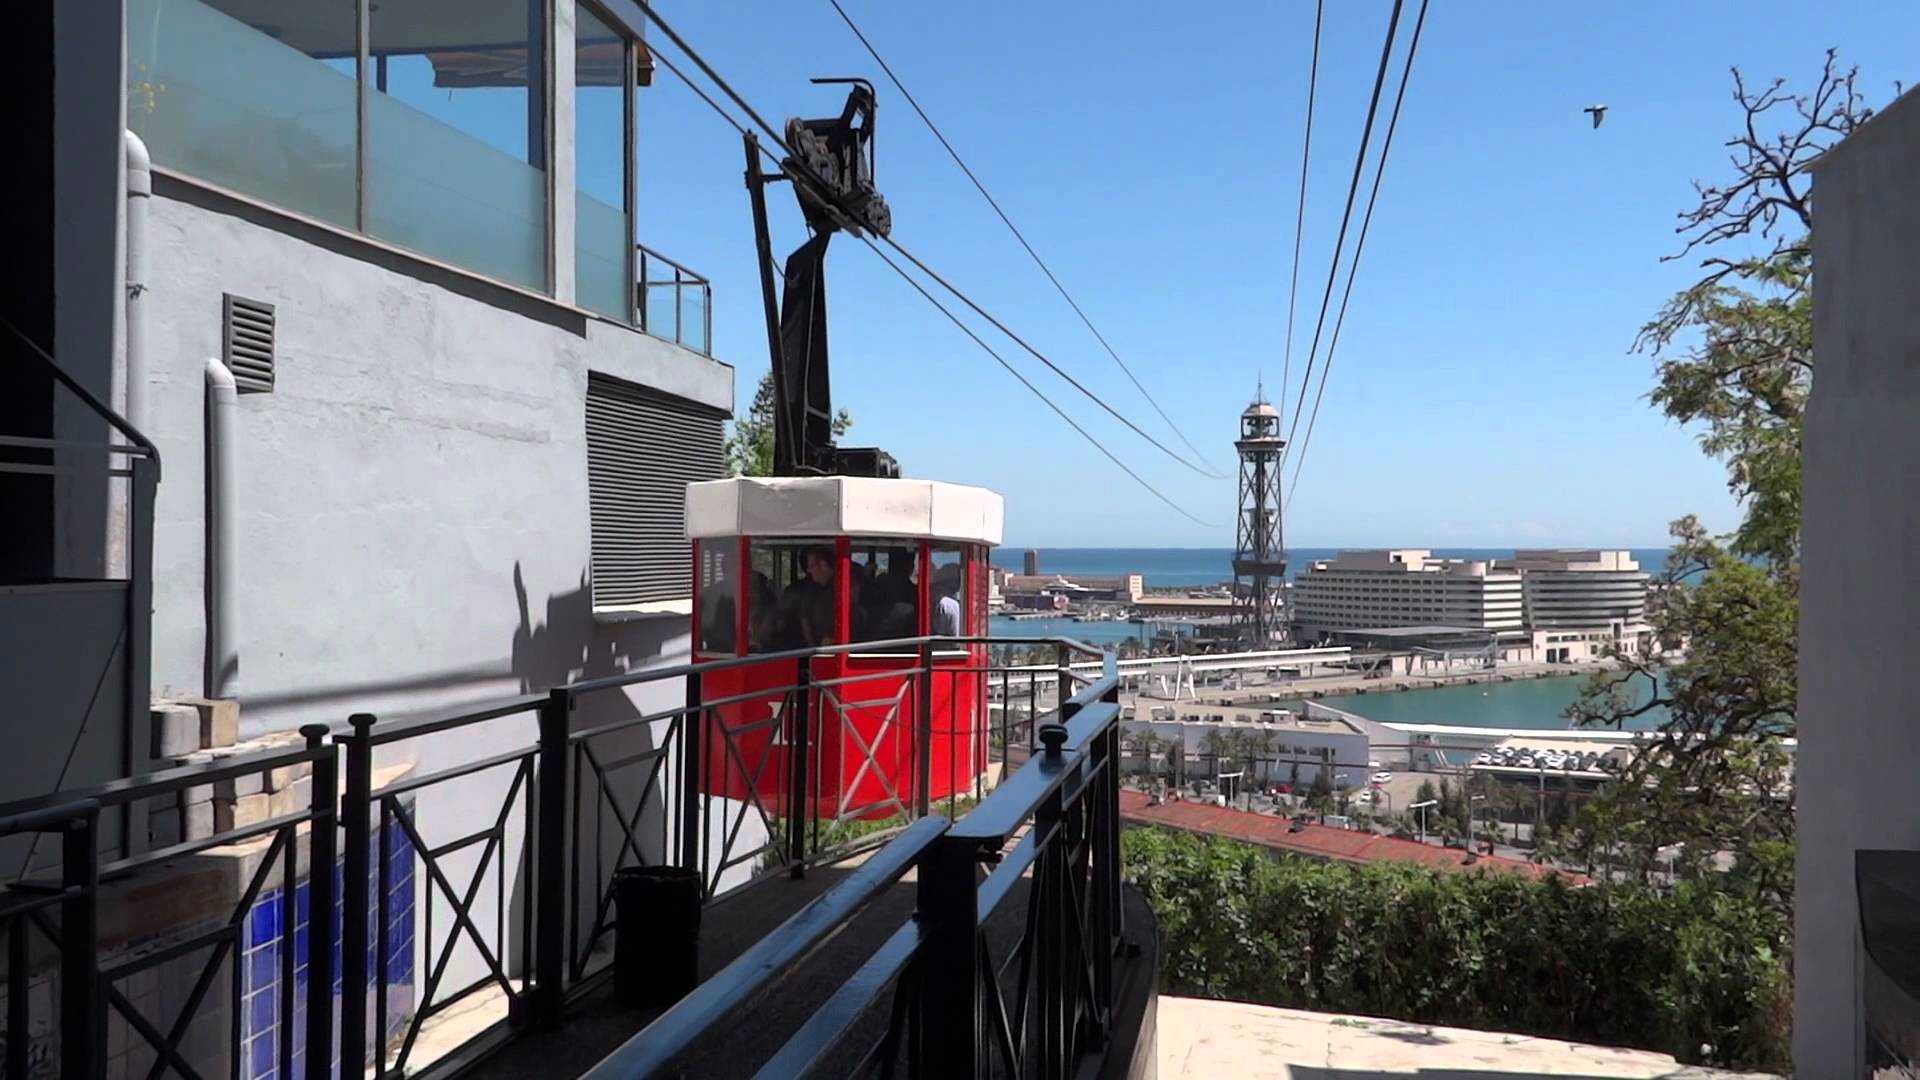 Barcelona Cable Car Ride - YouTube